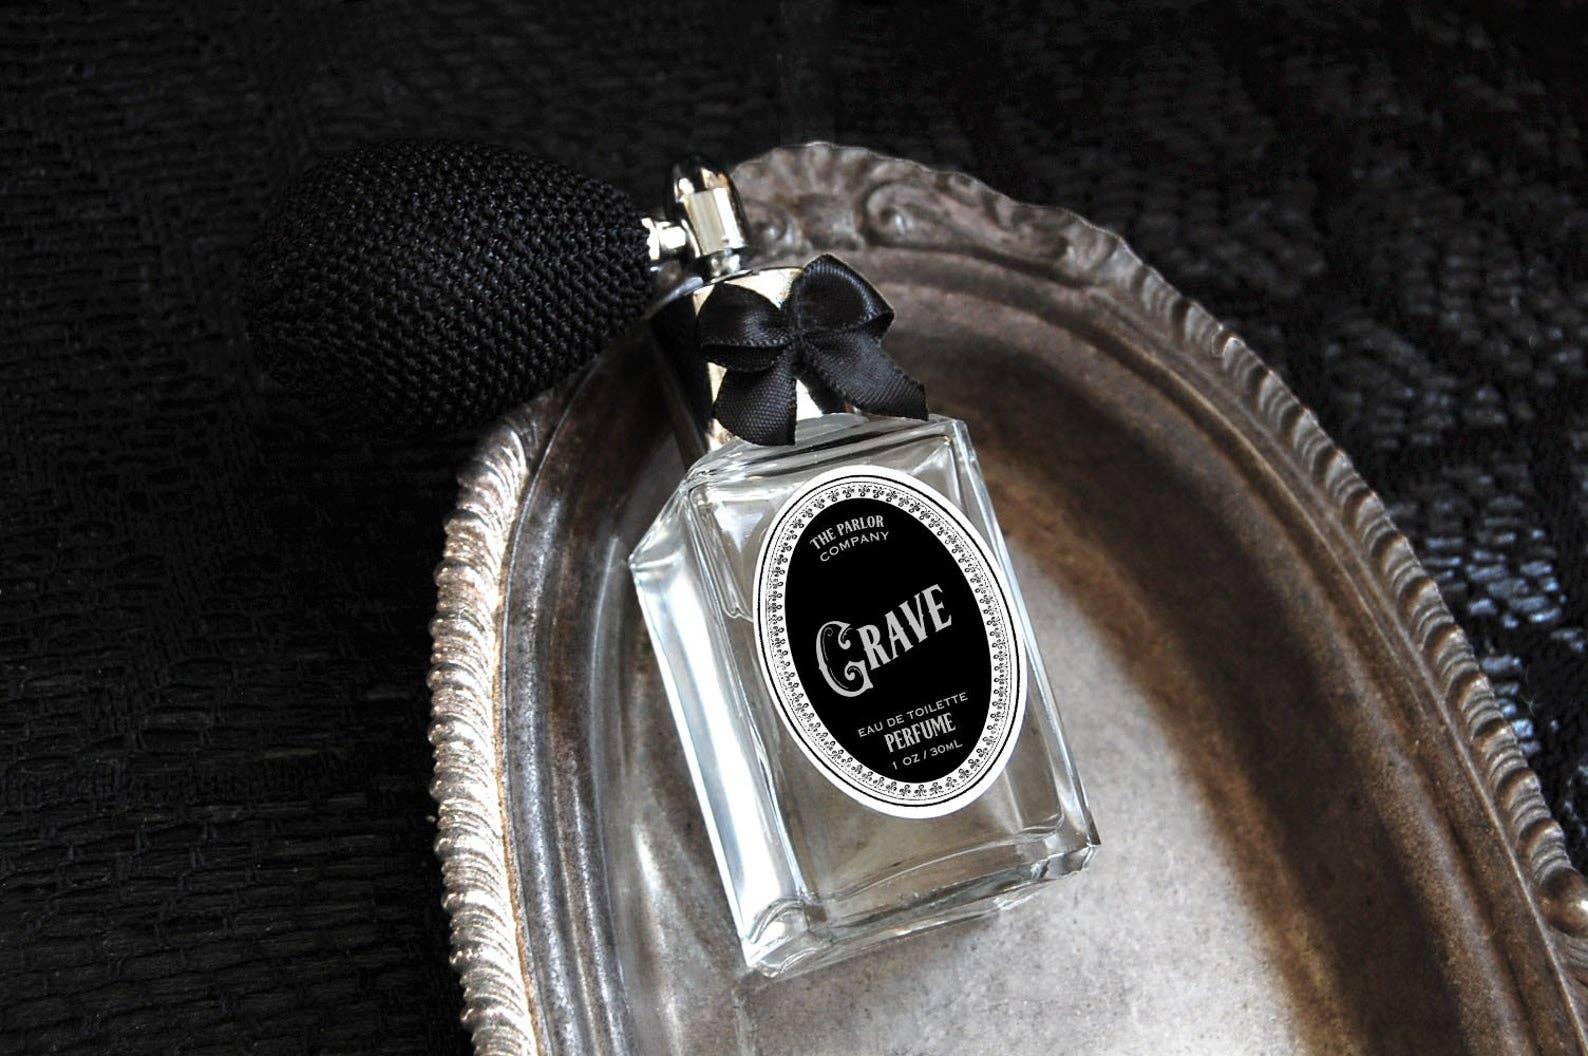 Mourning Collection - Grave Perfume- 1 Oz